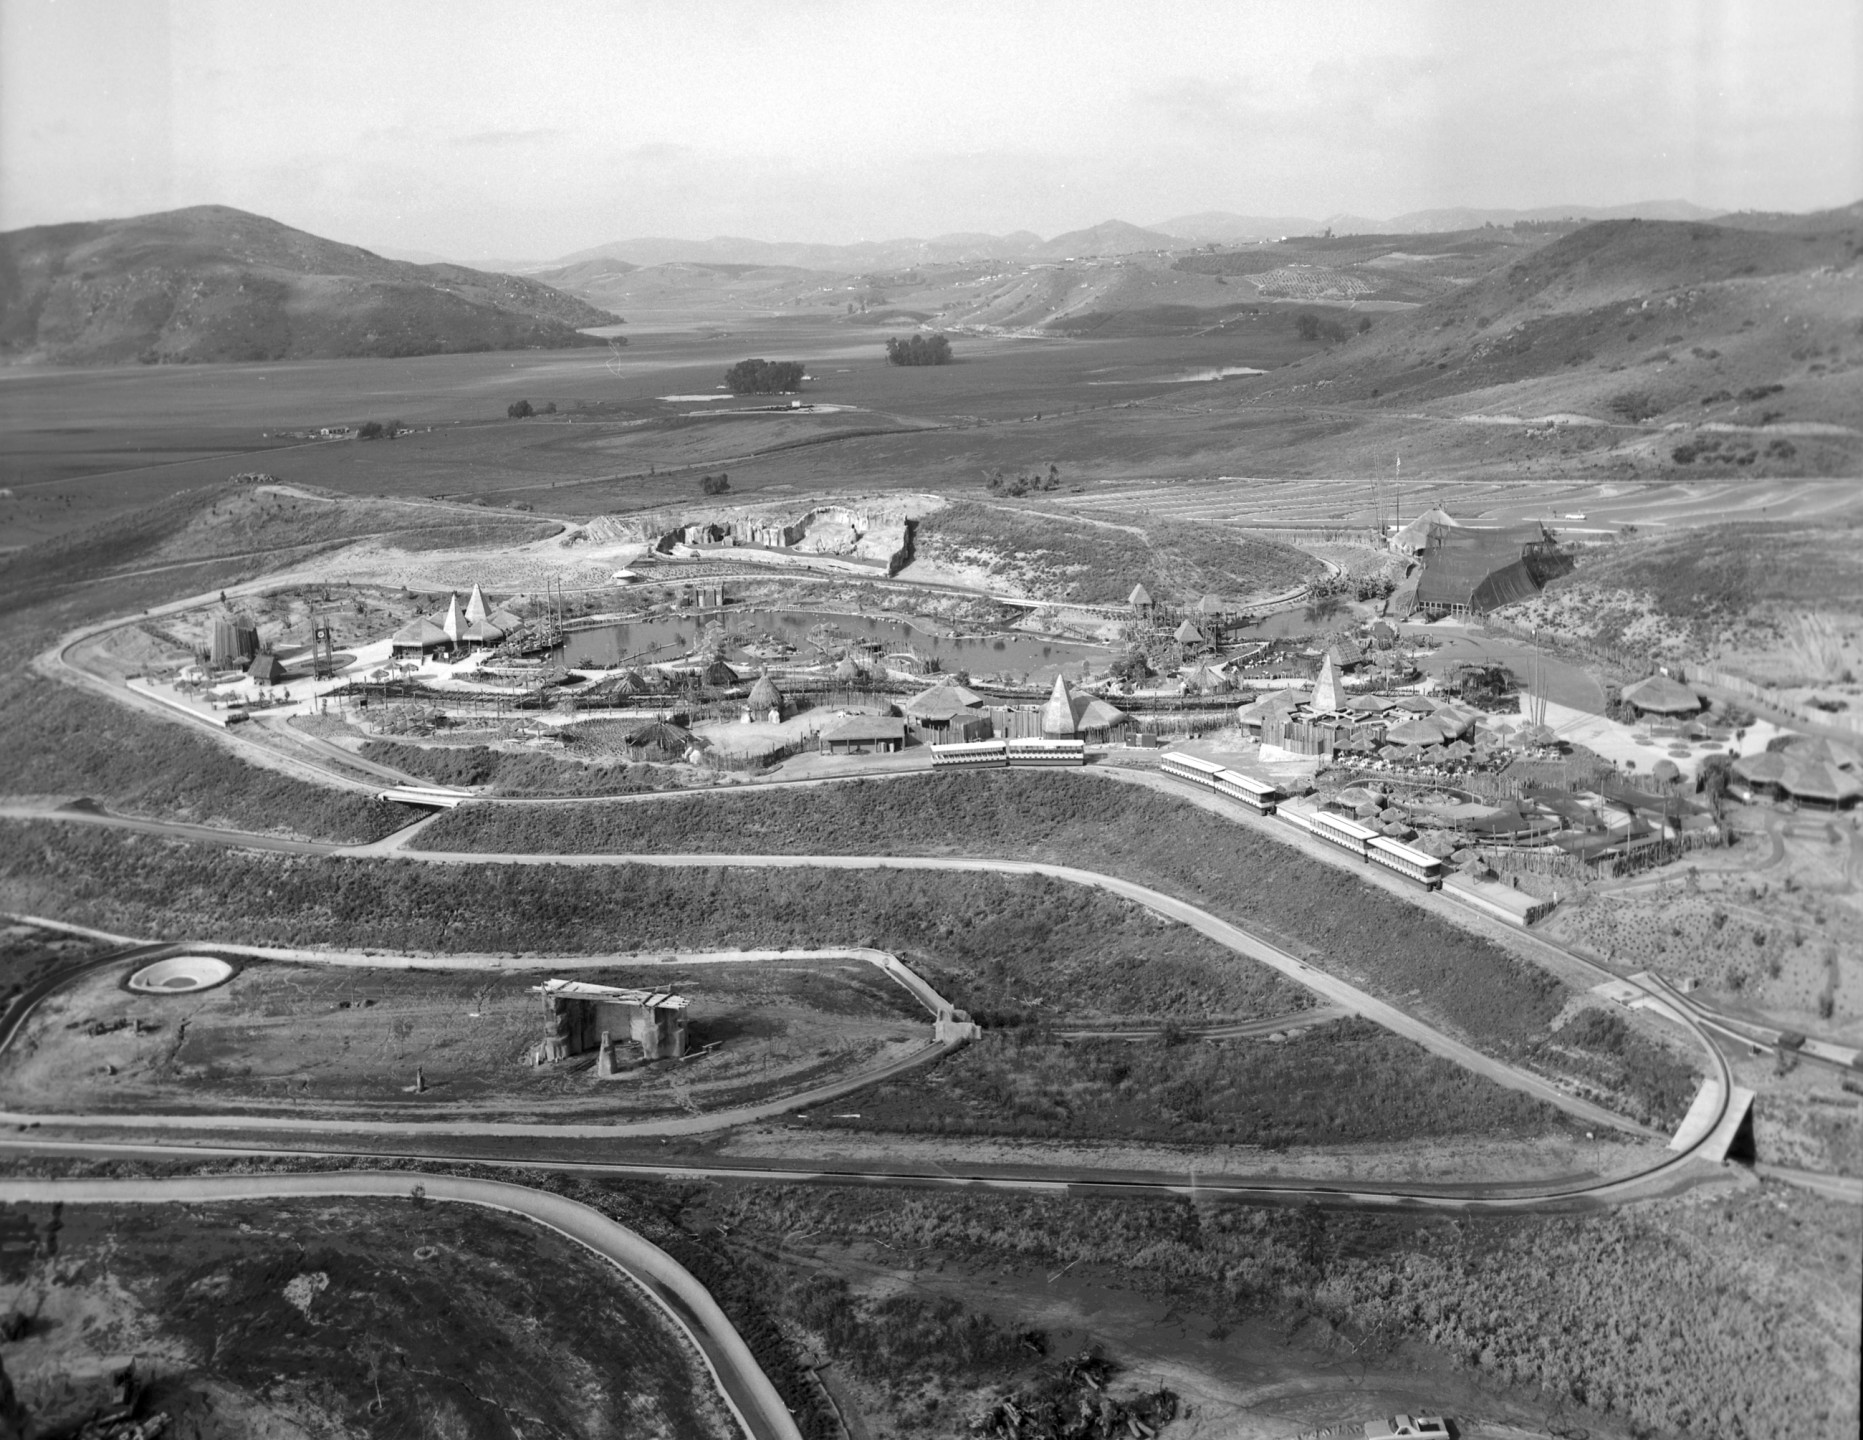 An aerial view of the Wild Animal Park in 1972